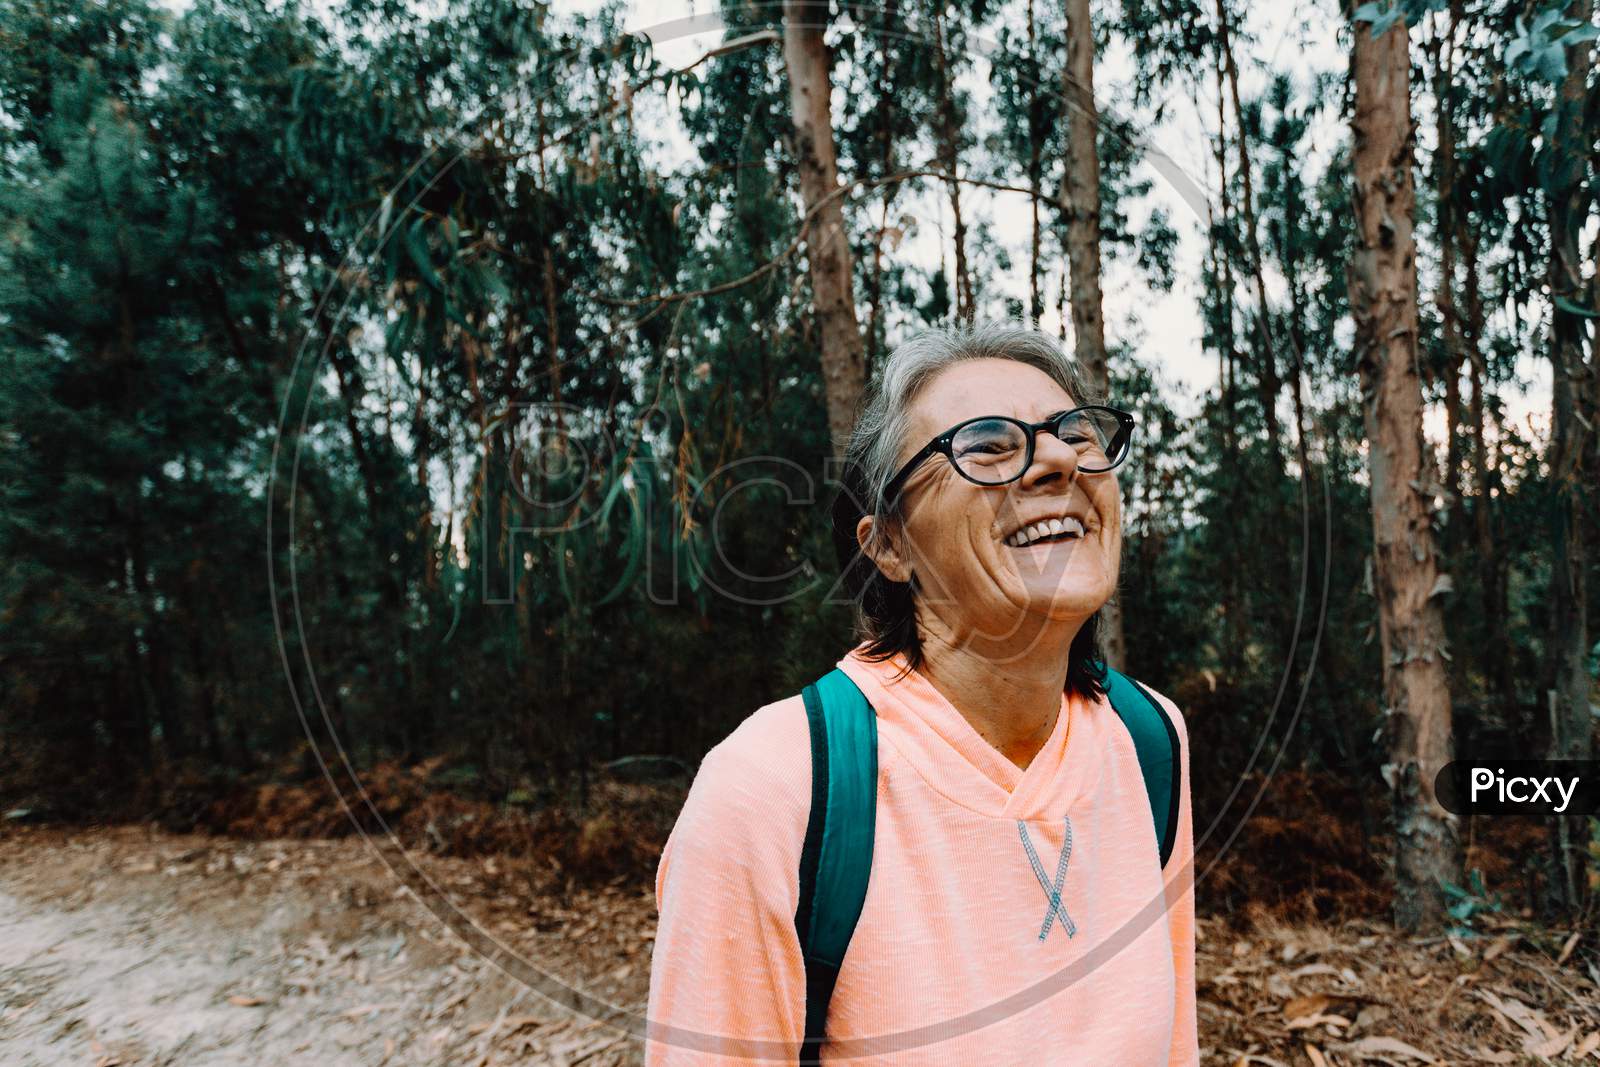 Old Woman Laughing In The Middle Of The Forest In Spain Wearing Sport Clothes With Copy Space